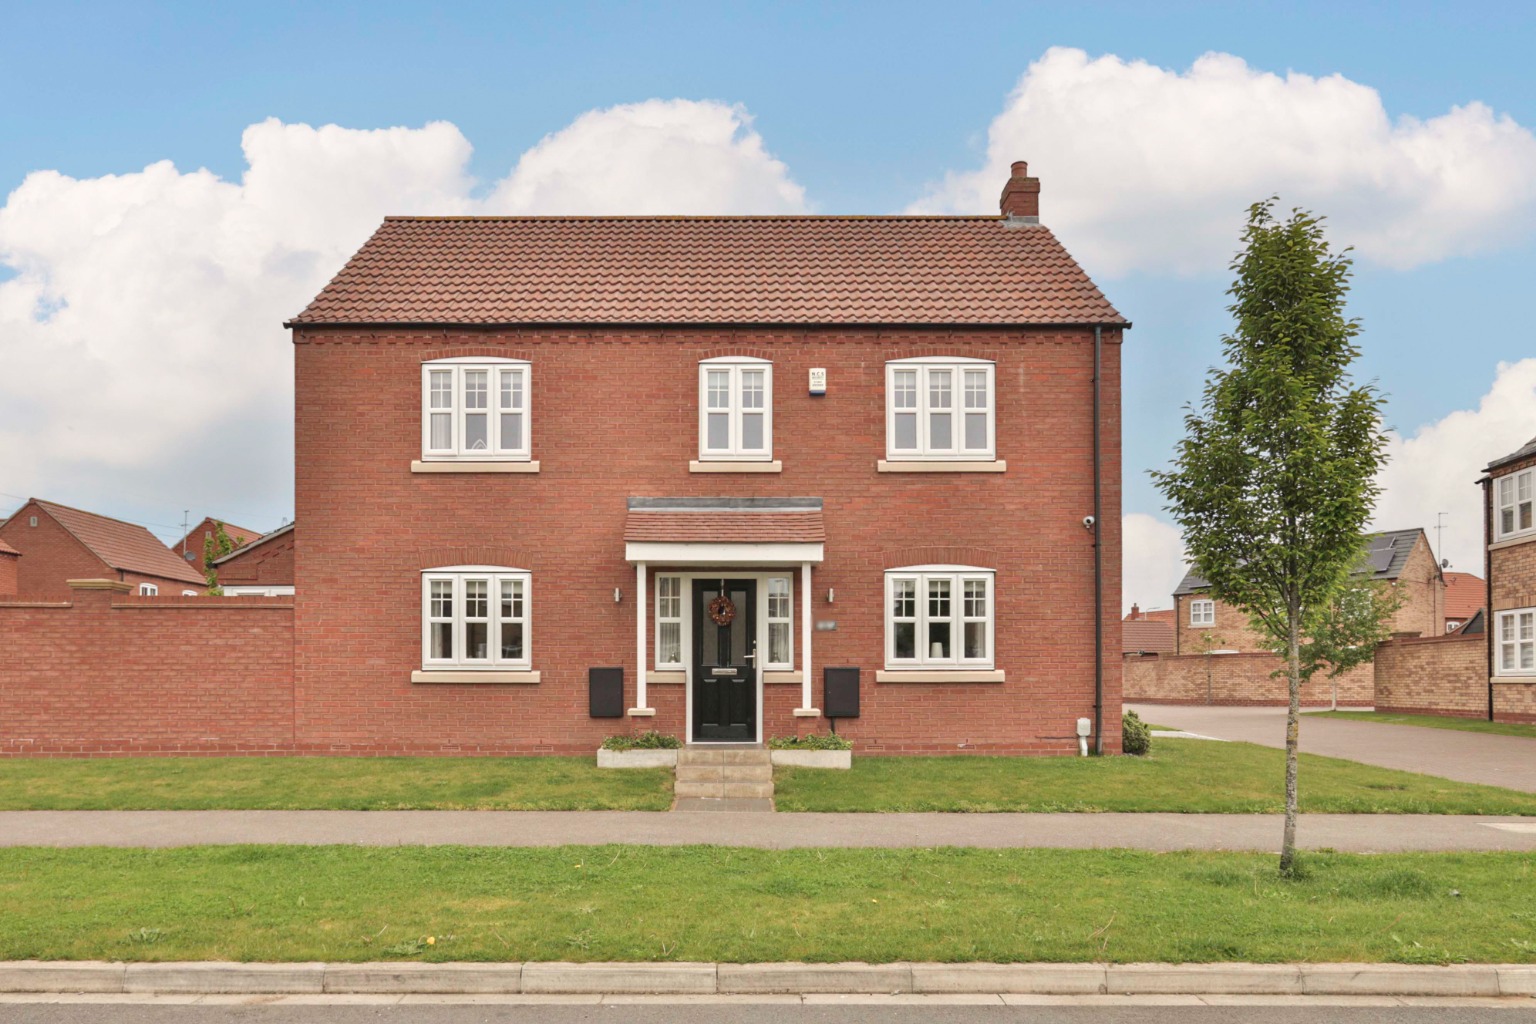 4 bed detached house for sale in Stable Way, Hull - Property Image 1